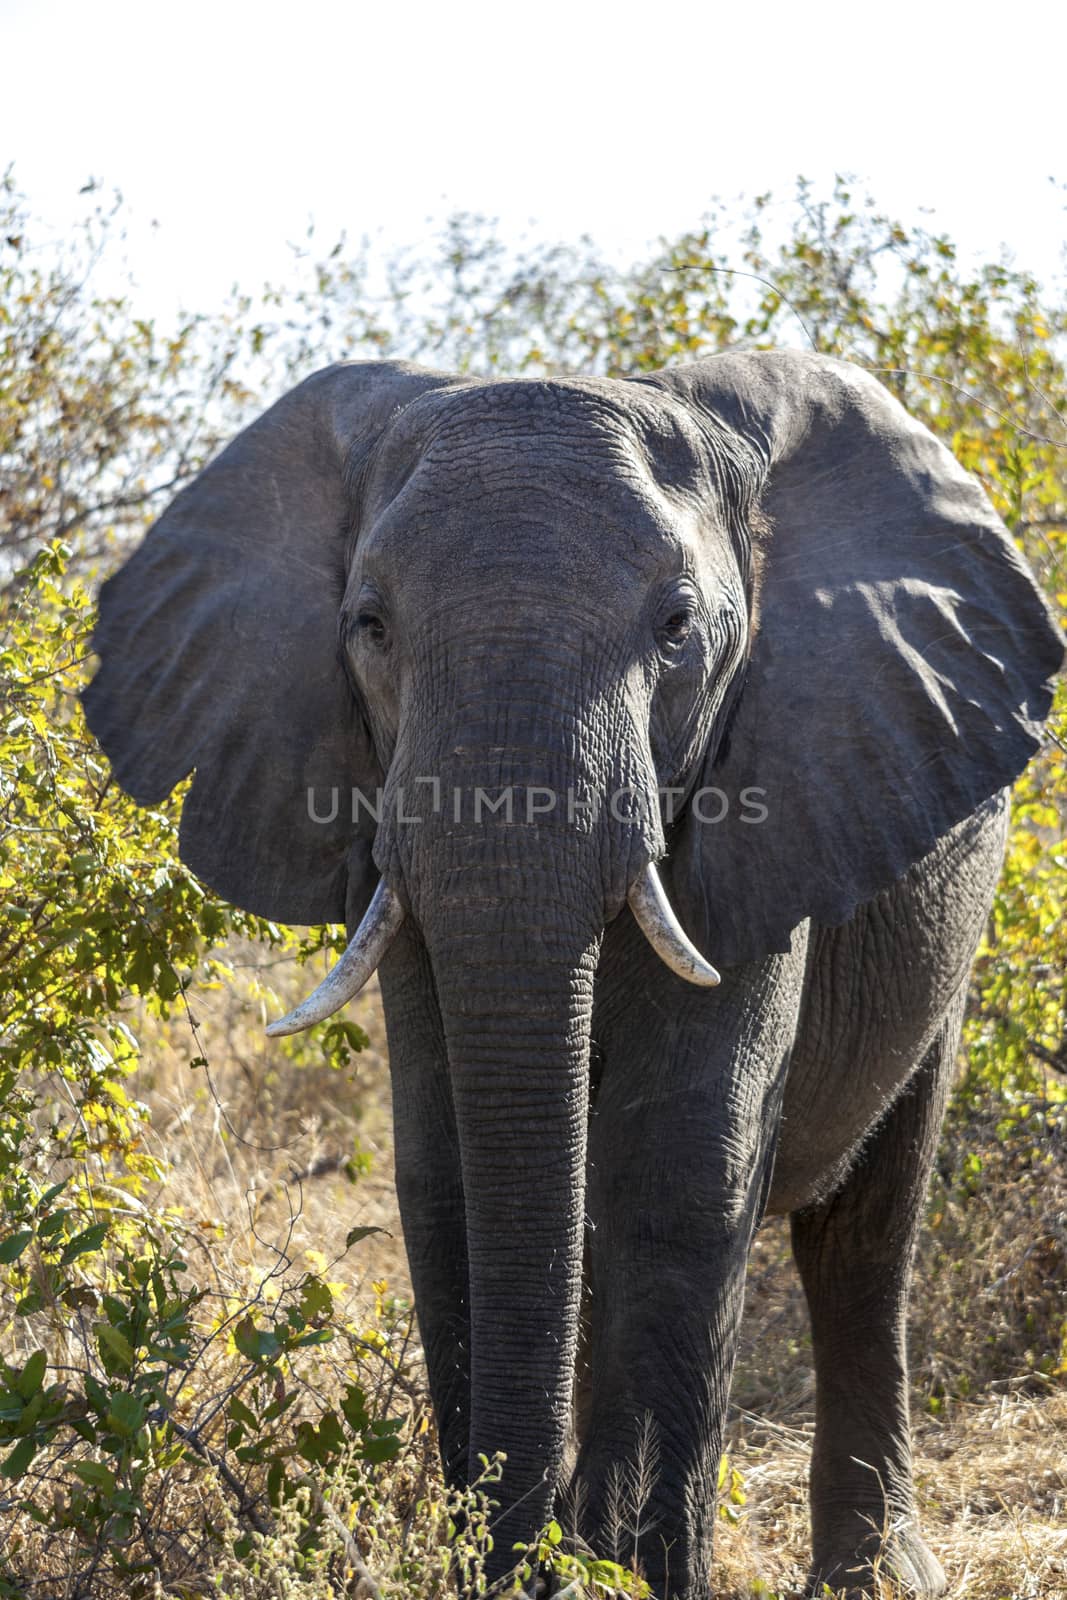 Grazing elephant close up in the wilderness